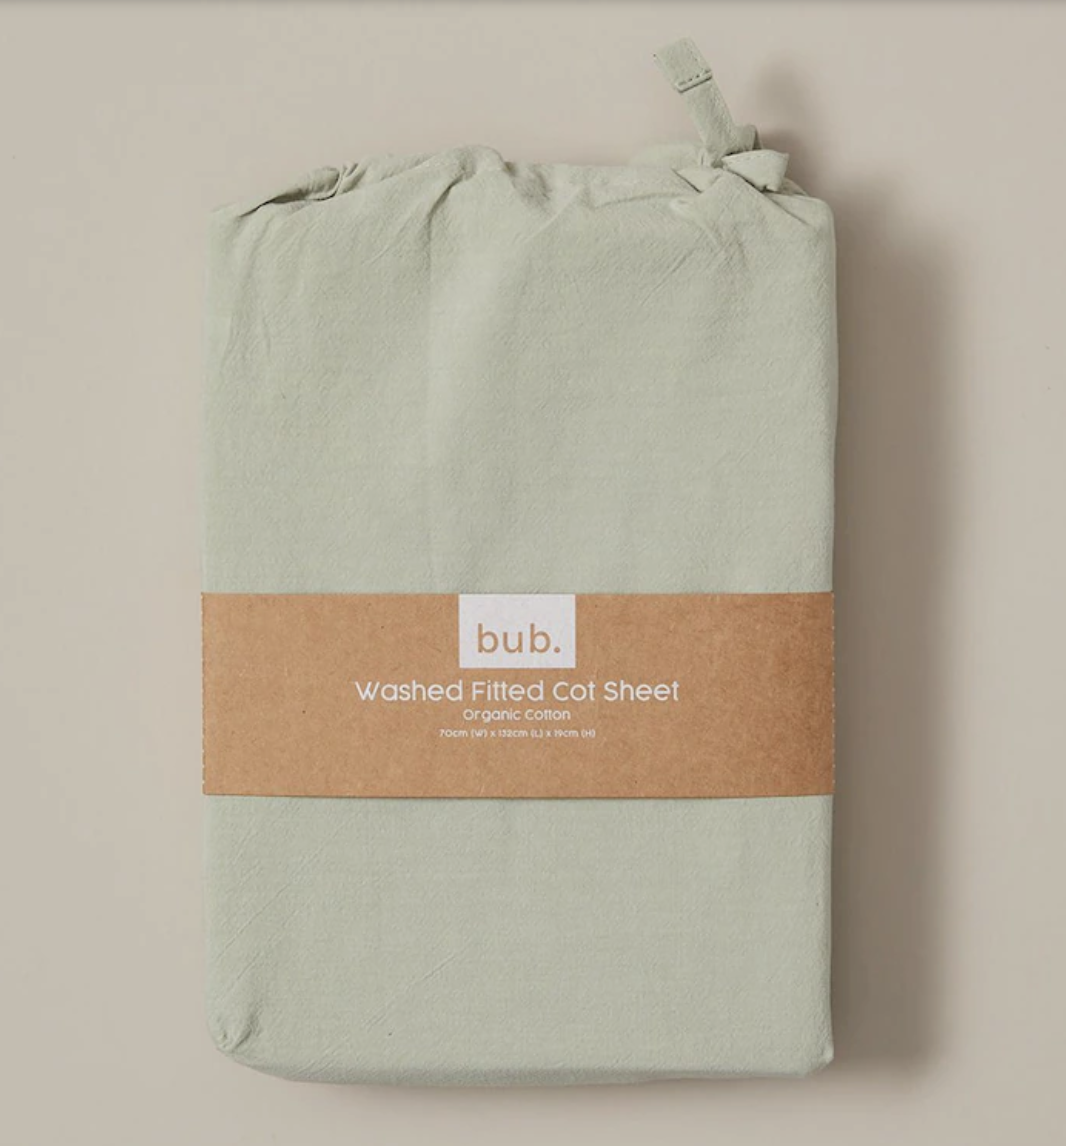 Target bub. Organic Cotton Arlo Washed Fitted Cot Sheet